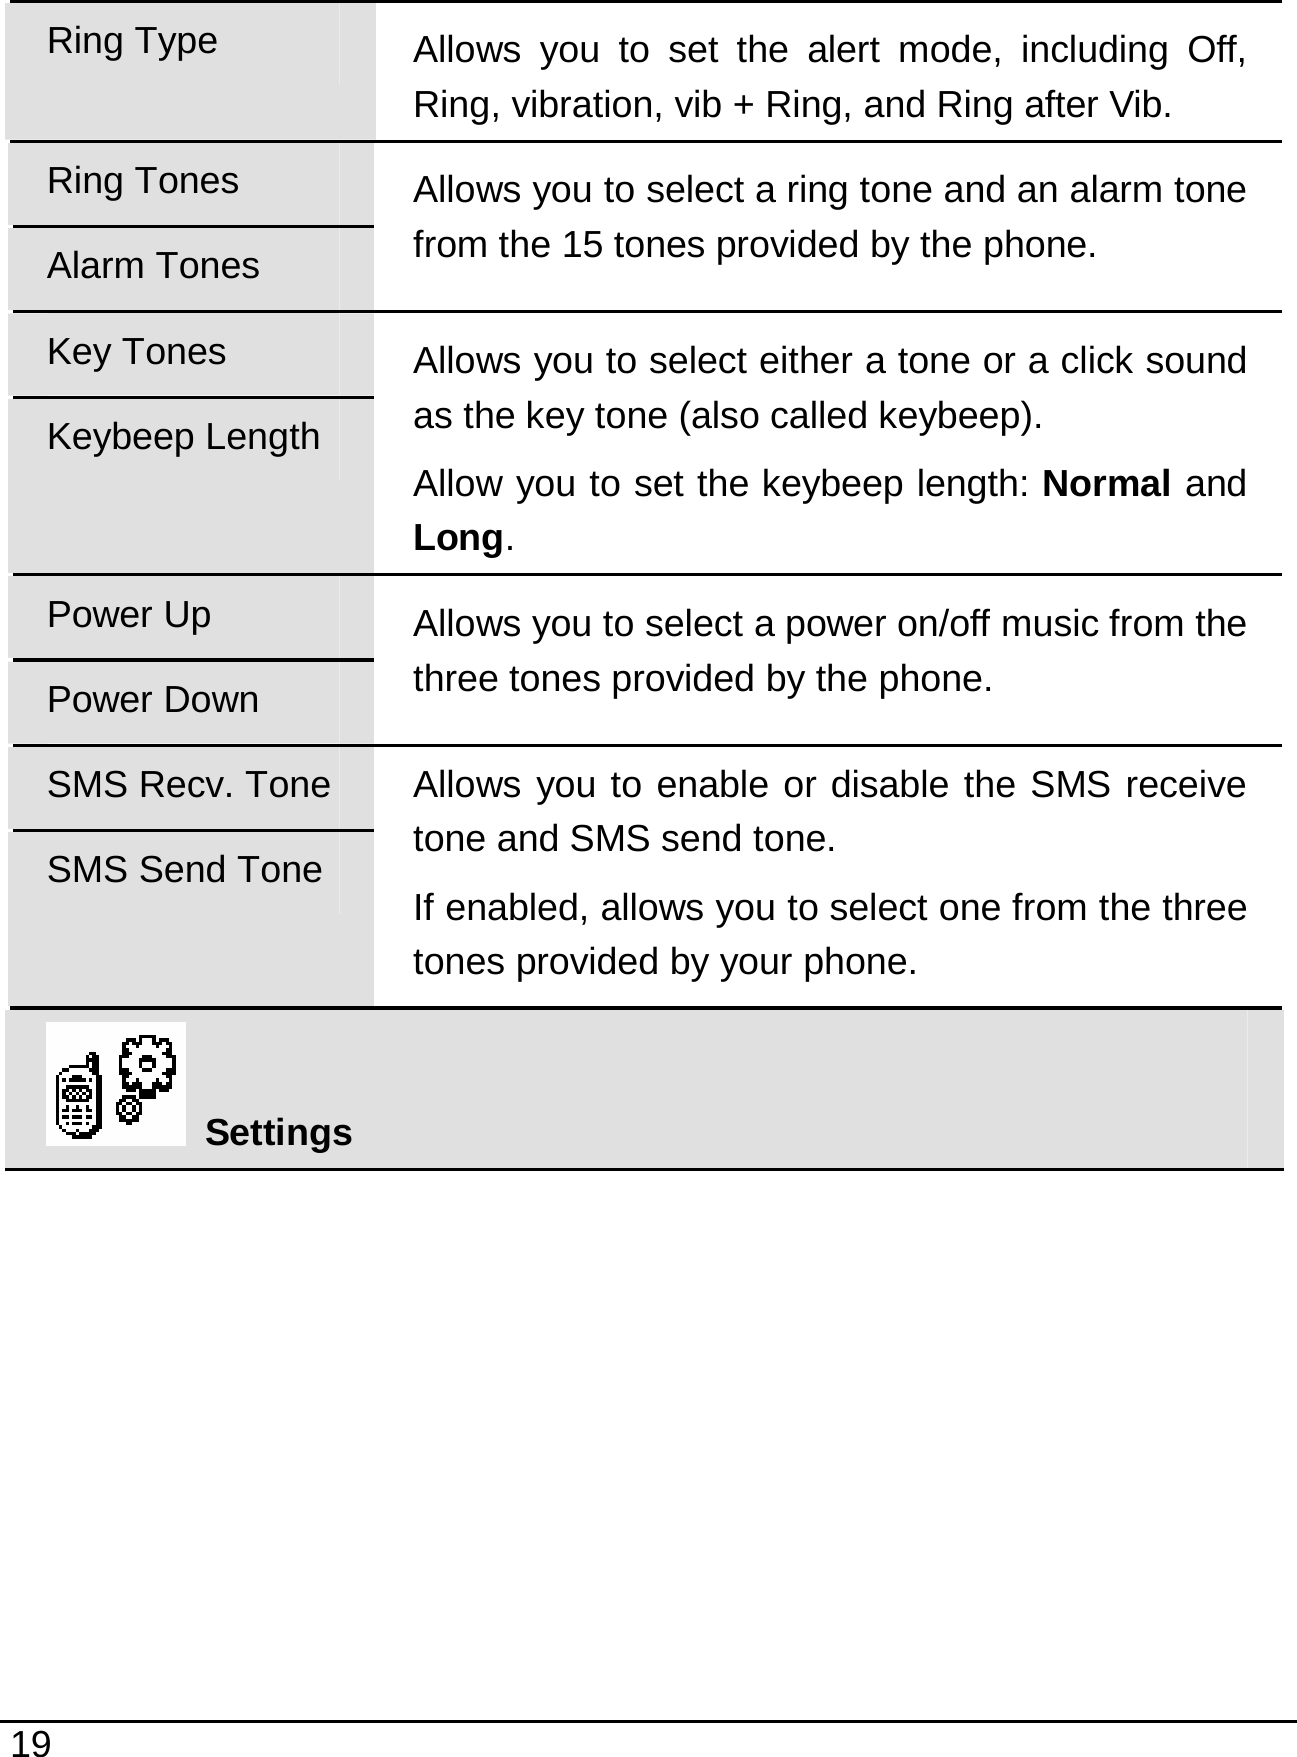   19  Ring Type  Allows you to set the alert mode, including Off, Ring, vibration, vib + Ring, and Ring after Vib. Ring Tones Alarm Tones Allows you to select a ring tone and an alarm tone from the 15 tones provided by the phone. Key Tones Keybeep Length Allows you to select either a tone or a click sound as the key tone (also called keybeep). Allow you to set the keybeep length: Normal and Long. Power Up Power Down Allows you to select a power on/off music from the three tones provided by the phone. SMS Recv. Tone SMS Send Tone Allows you to enable or disable the SMS receive tone and SMS send tone. If enabled, allows you to select one from the three tones provided by your phone.  Settings 